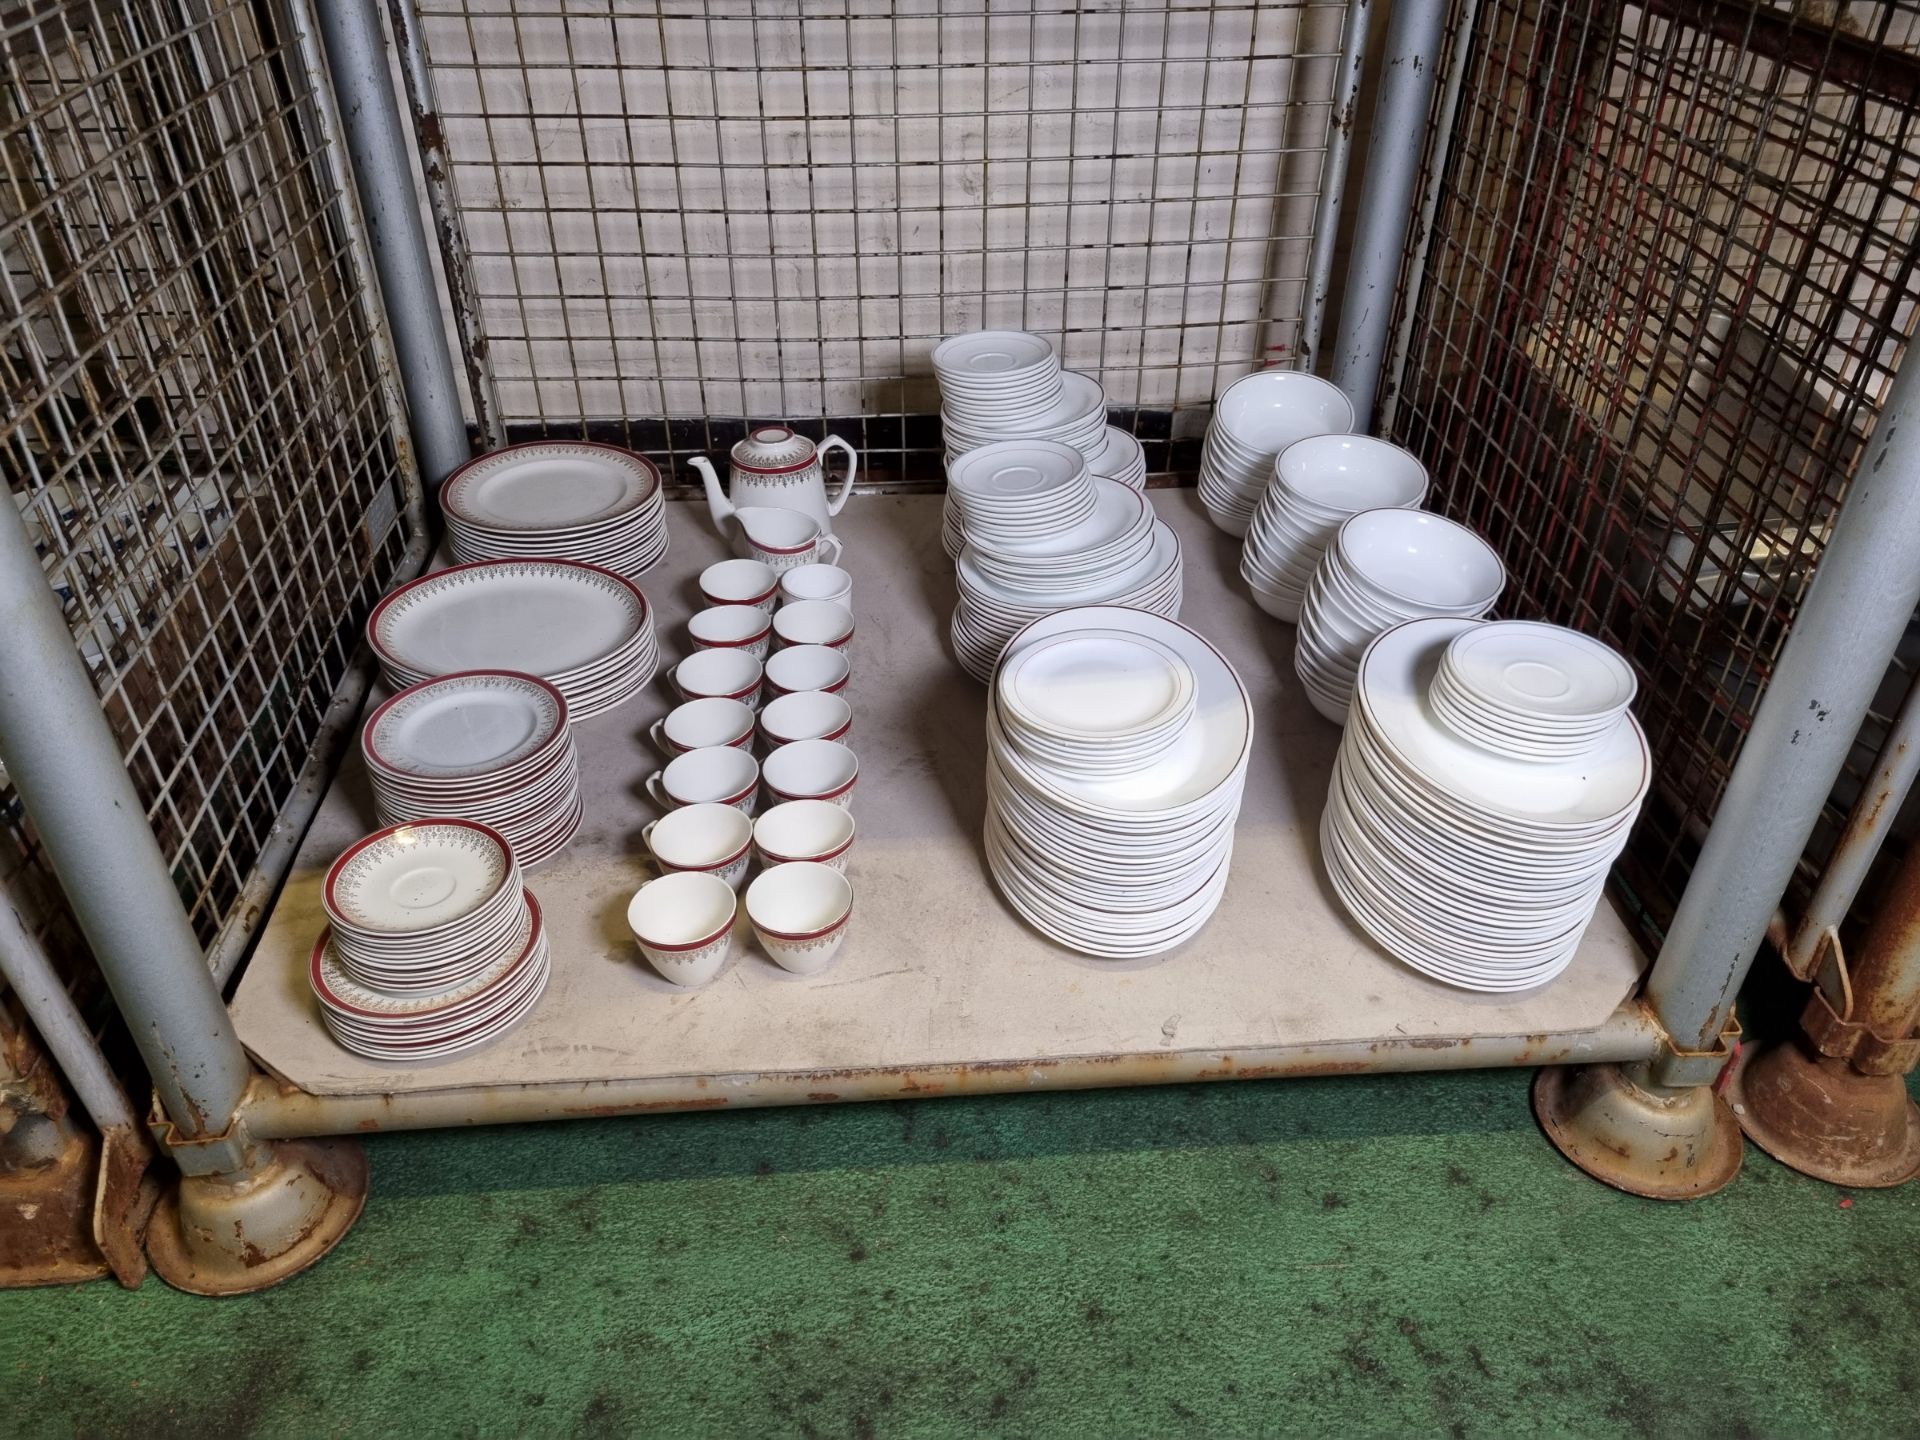 Catering equipment - Myott Royalty and Arcopal France plates, cups, saucers, bowls and teapot